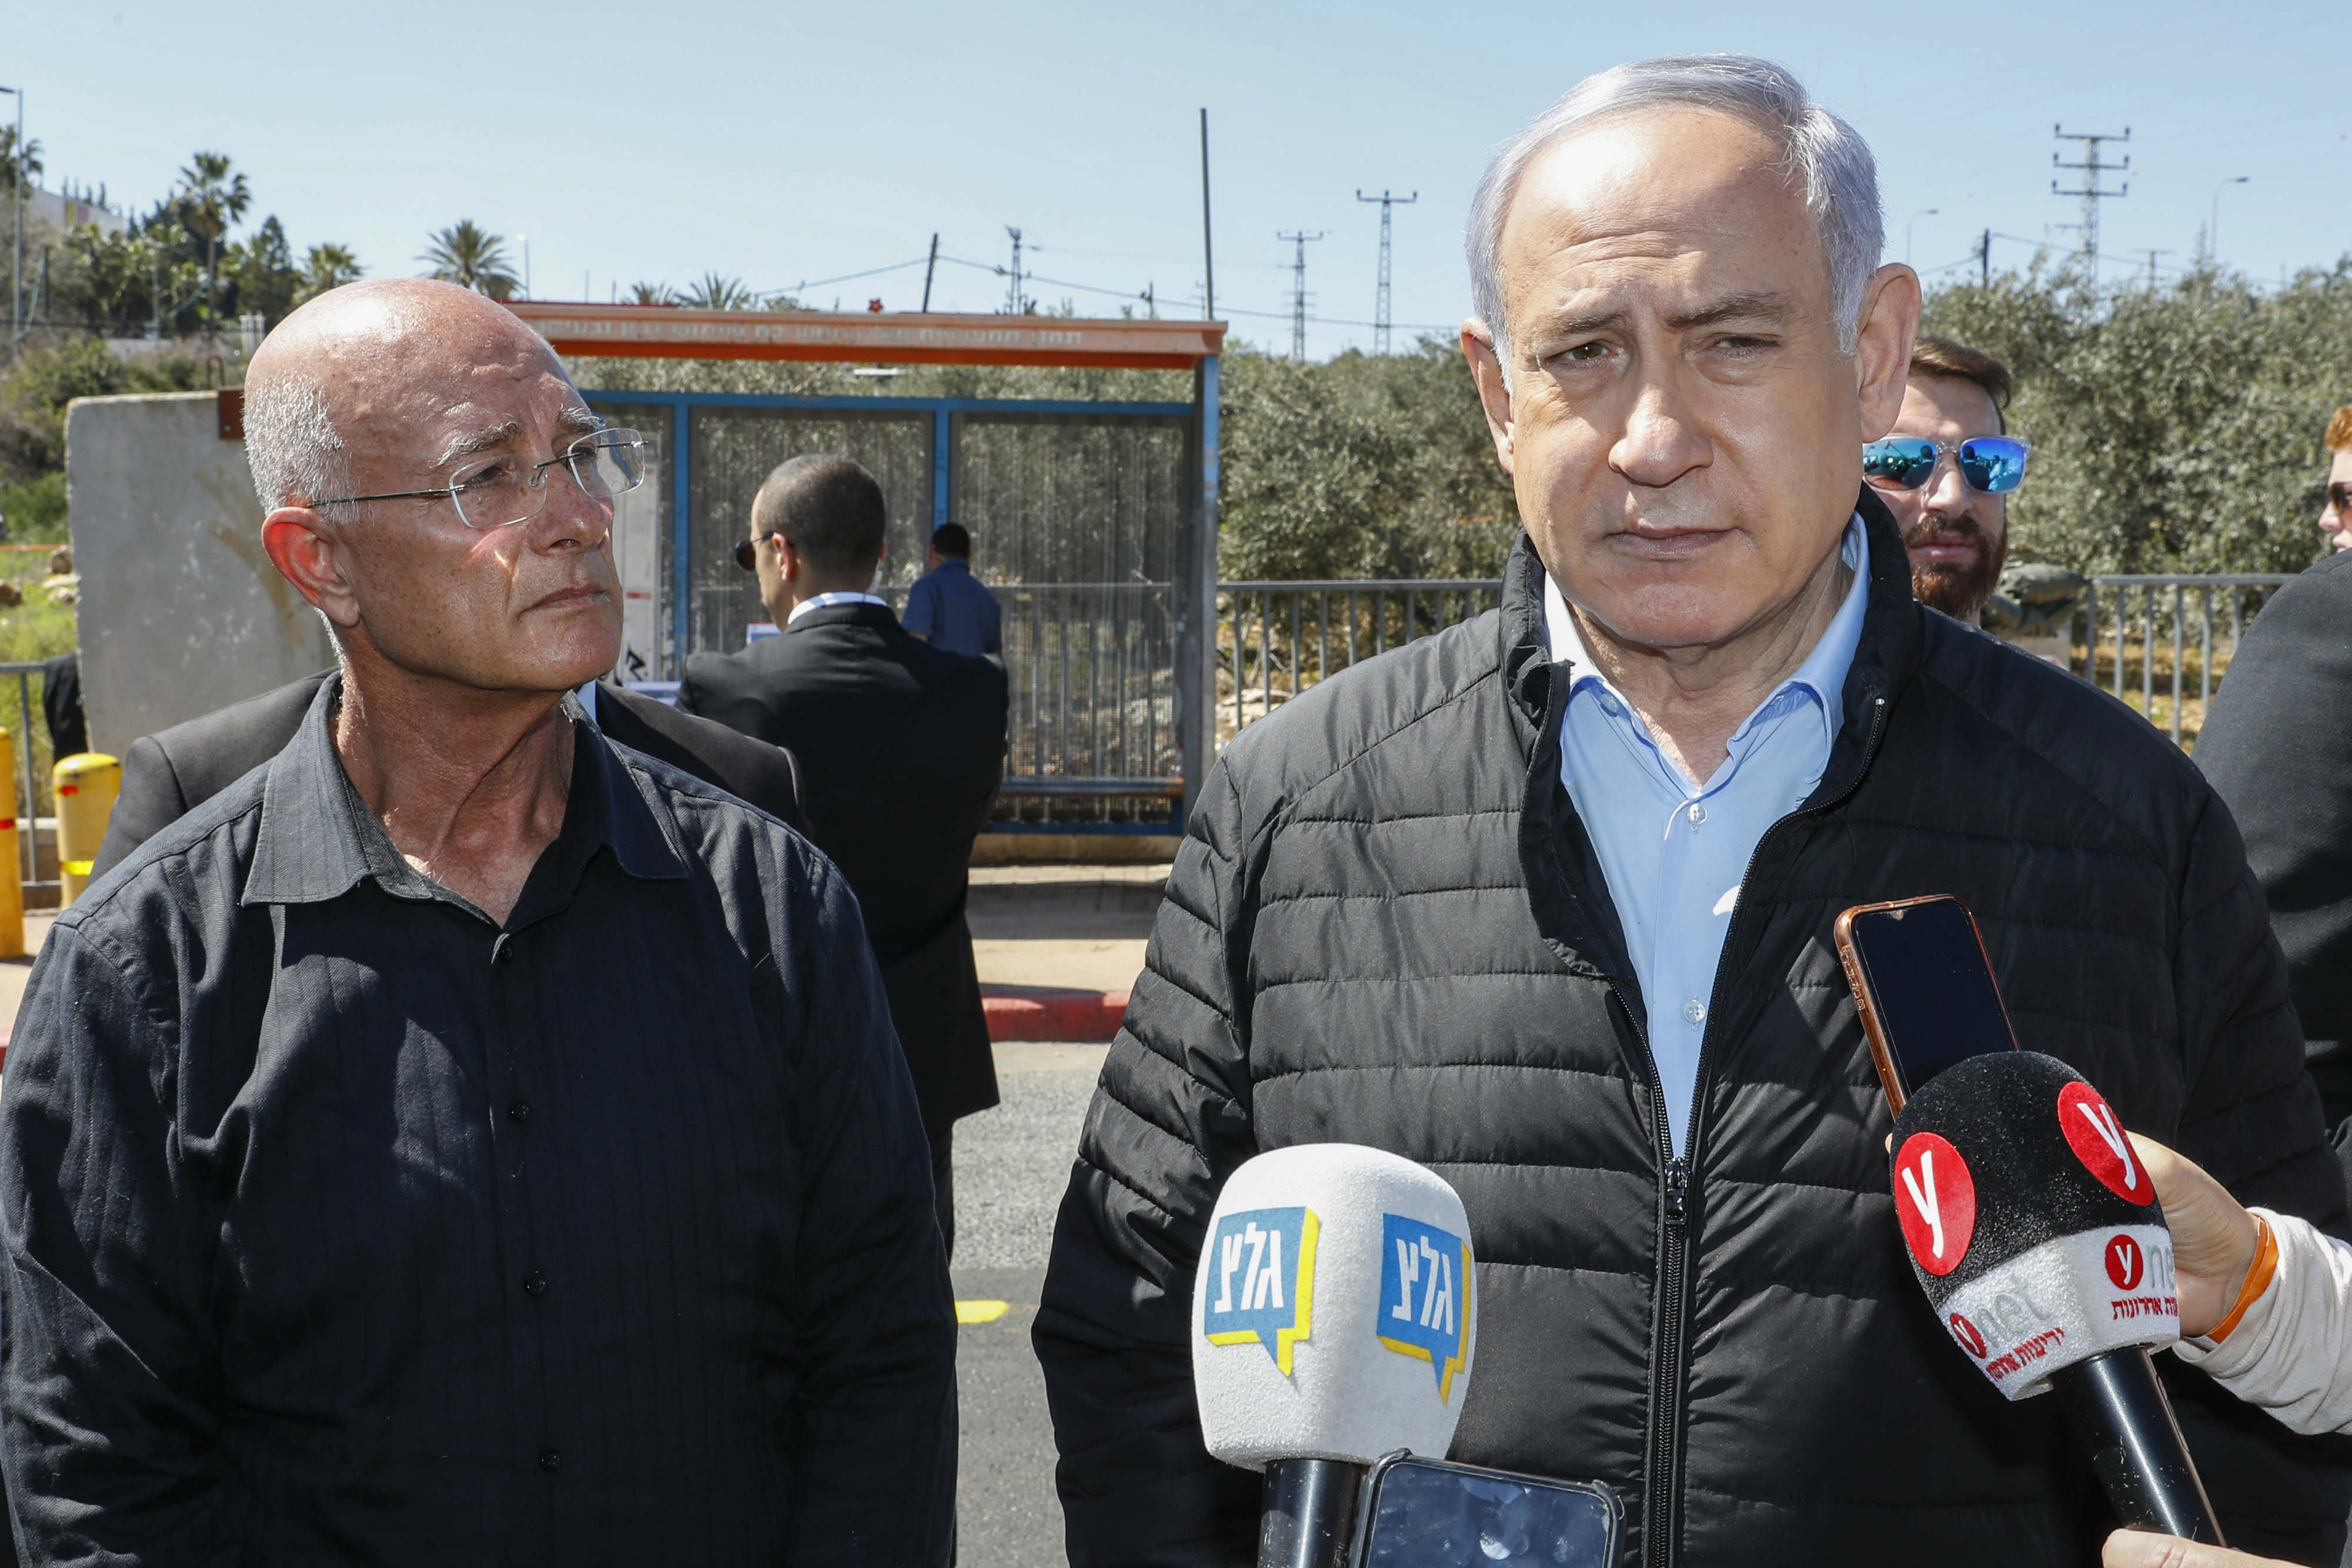 Israeli Prime Minister Benjamin Netanhayu arrives at the scene of gun and knife attack, carried out by a Palestinian the previous day, at the Ariel junction (AFP)